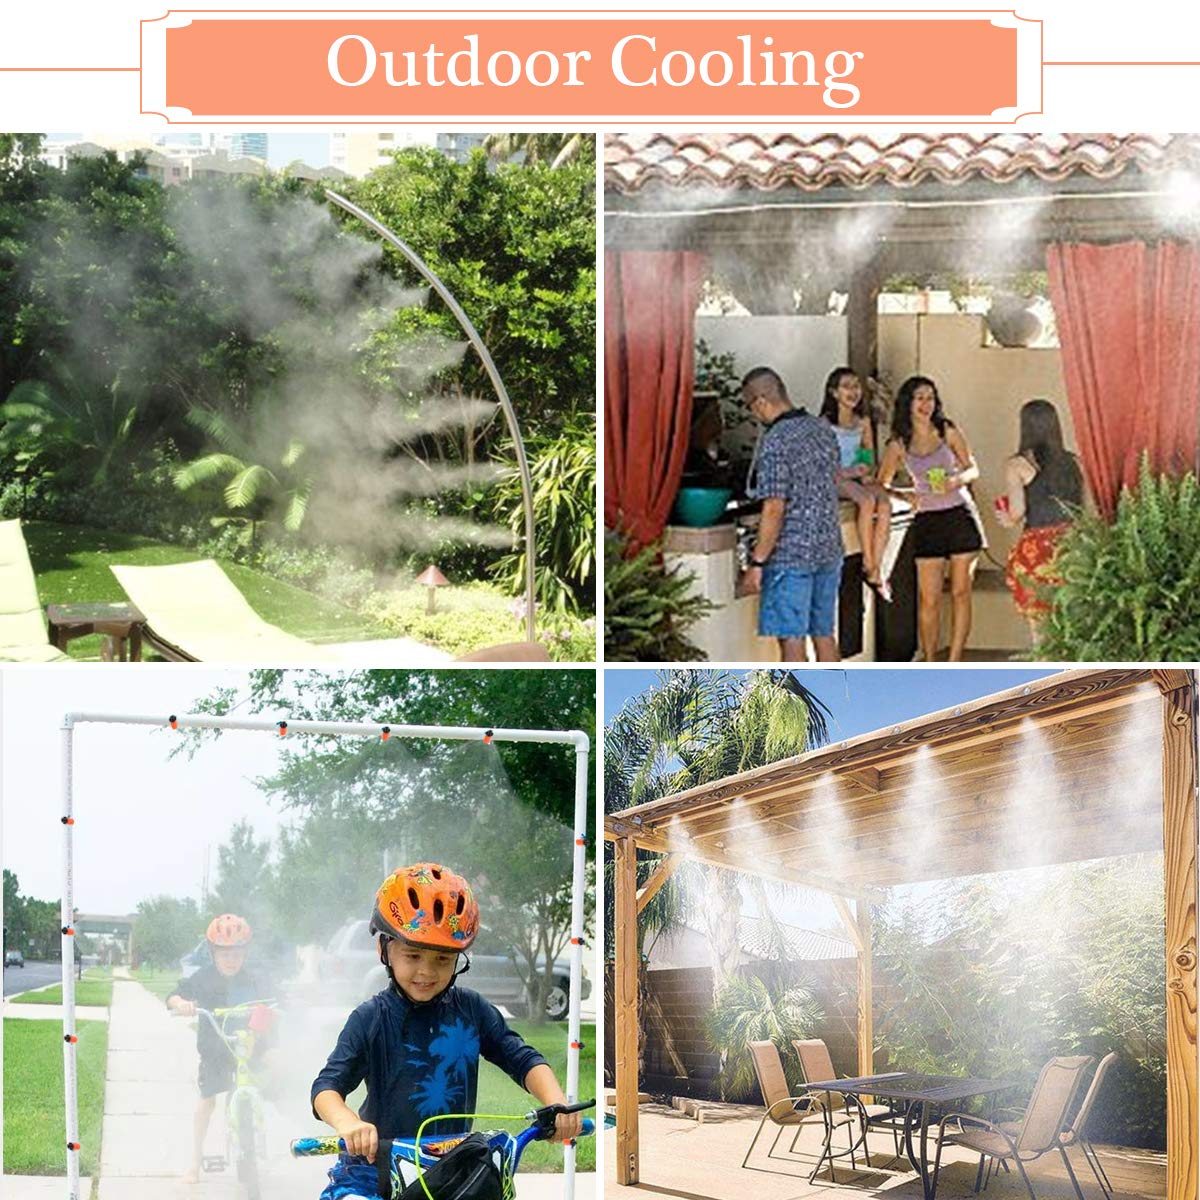 OUTDOOR COOLING SYSTEM